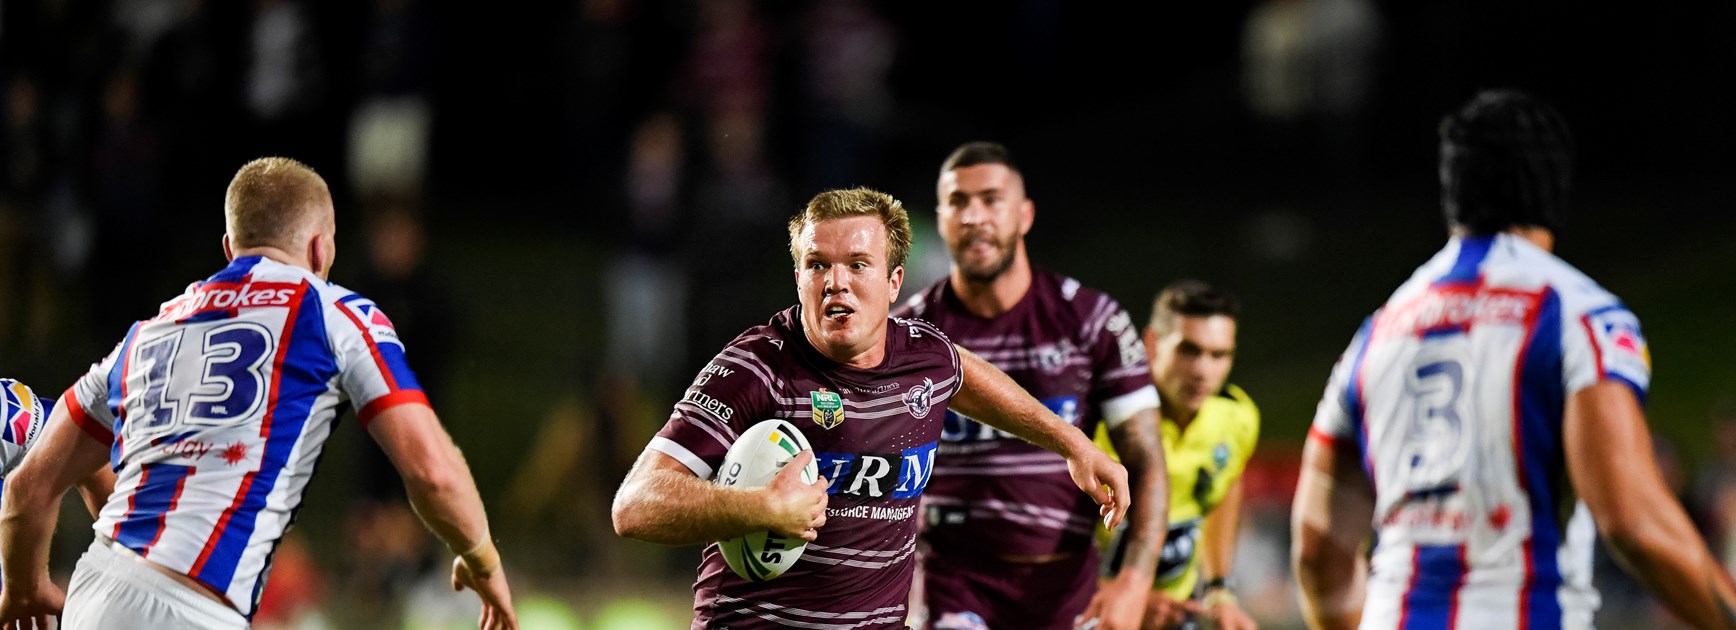 NRL: Manly lose 18-12 to Knights